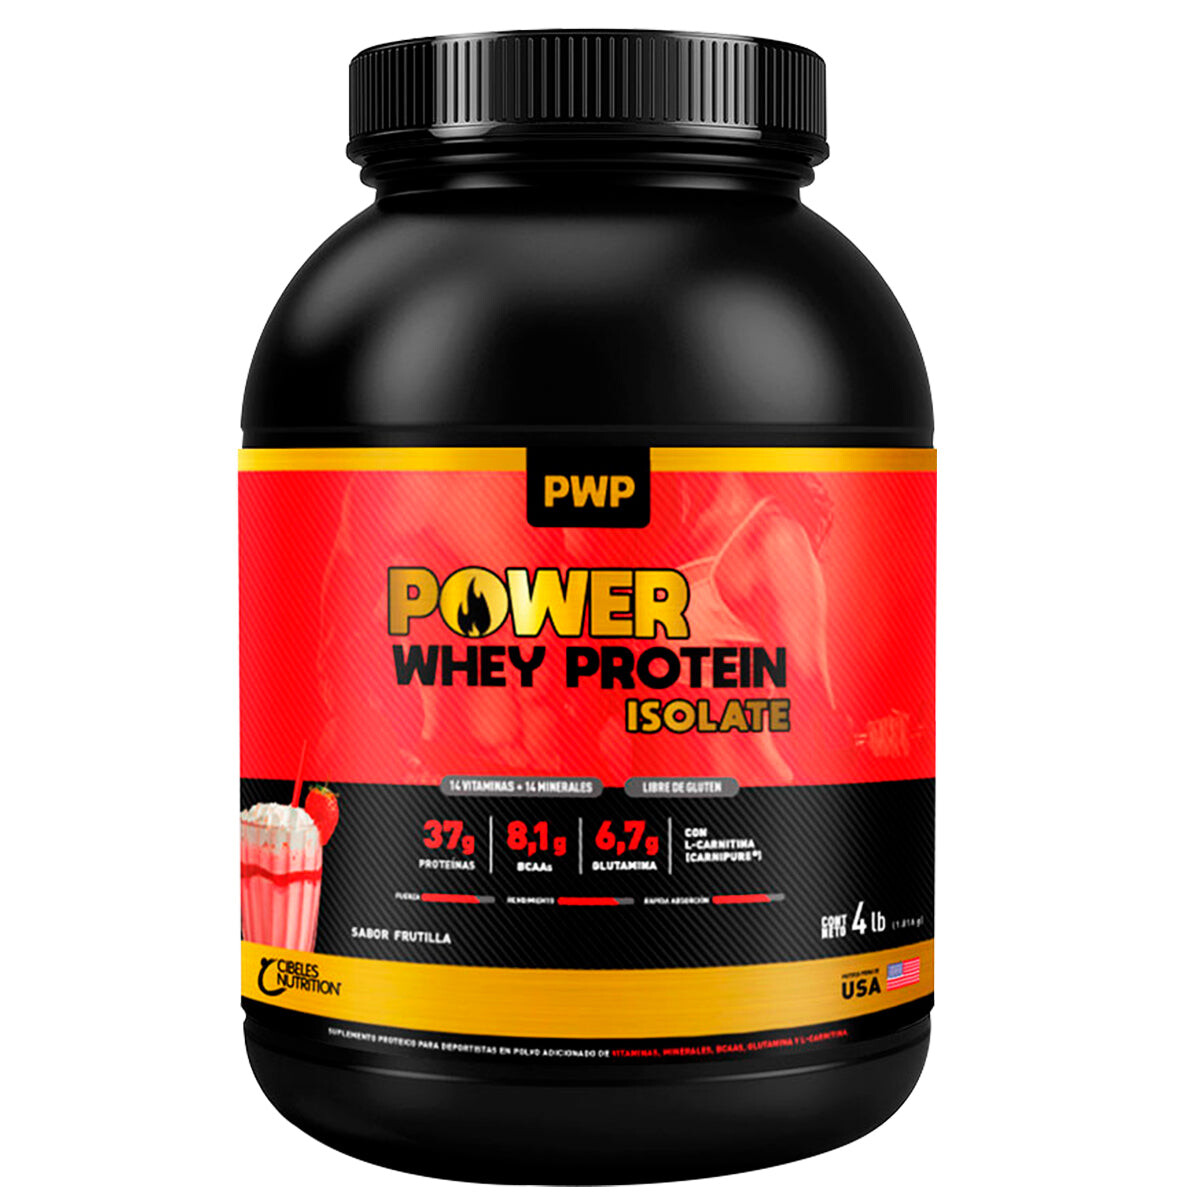 Suplemento Pwp Whey Protein Isolate 1816g Calidad Nº1 